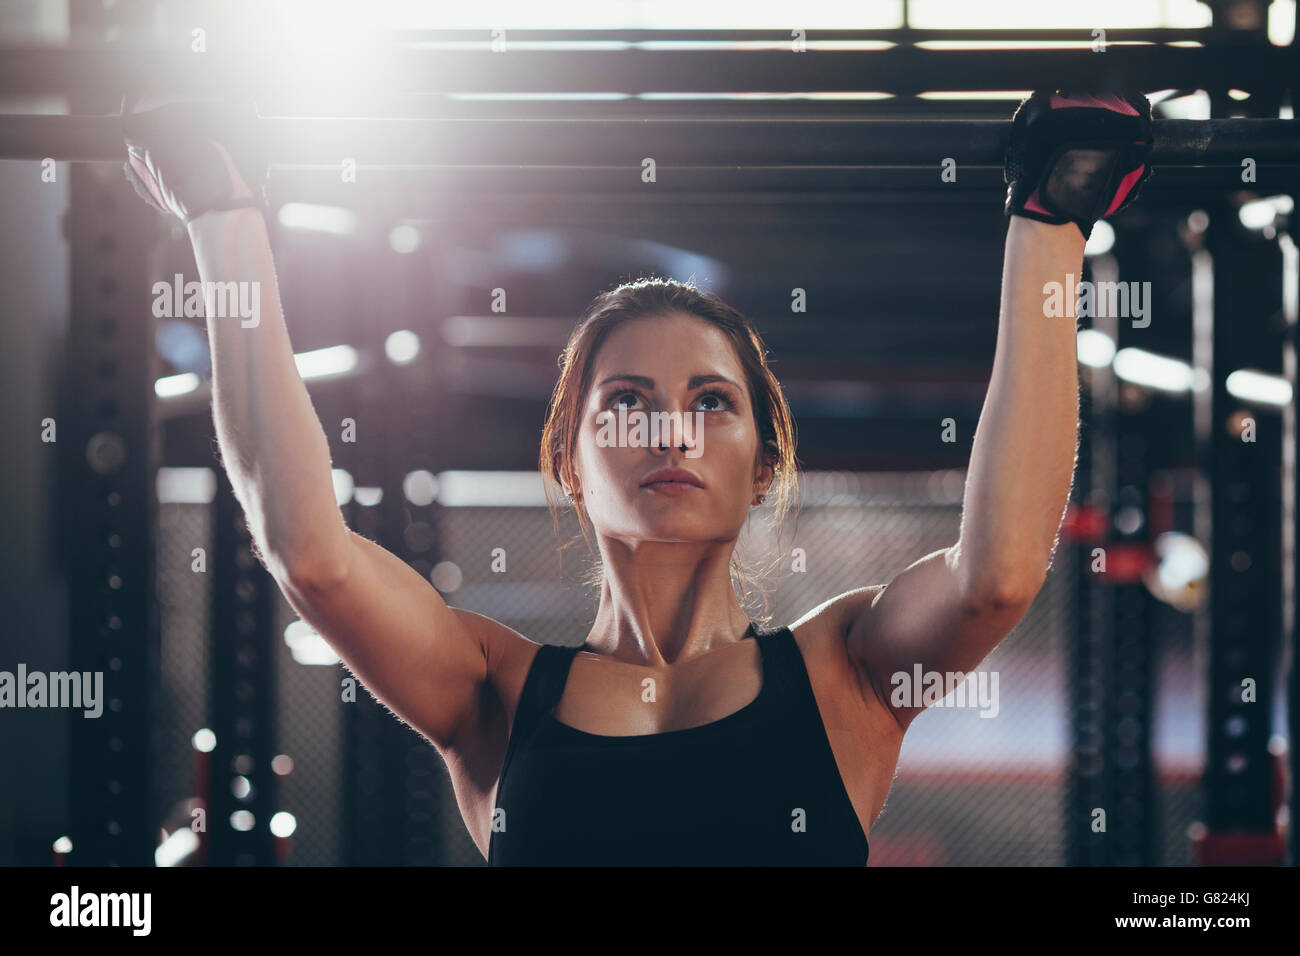 Close-up of young woman doing chin-ups at gym Stock Photo